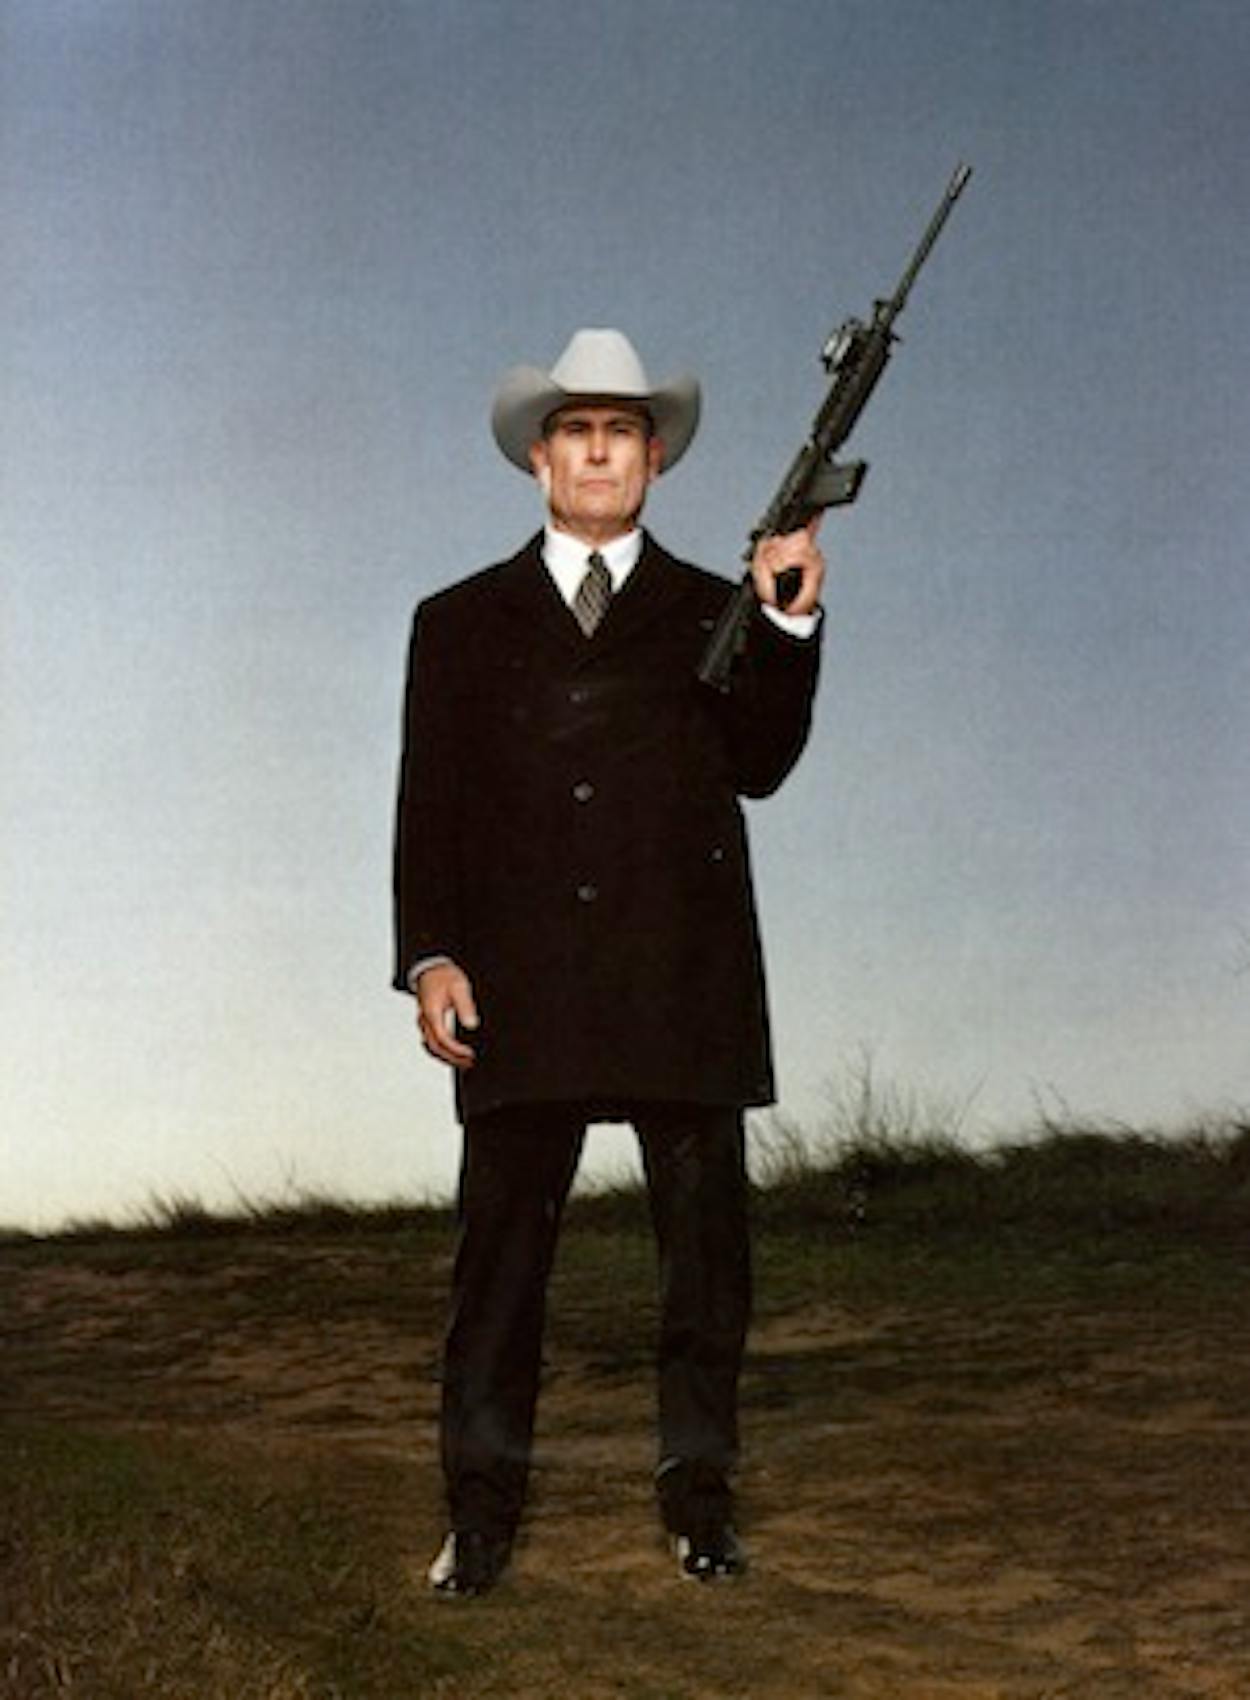 Clete Buckaloo standing tall with a gun over one shoulder.